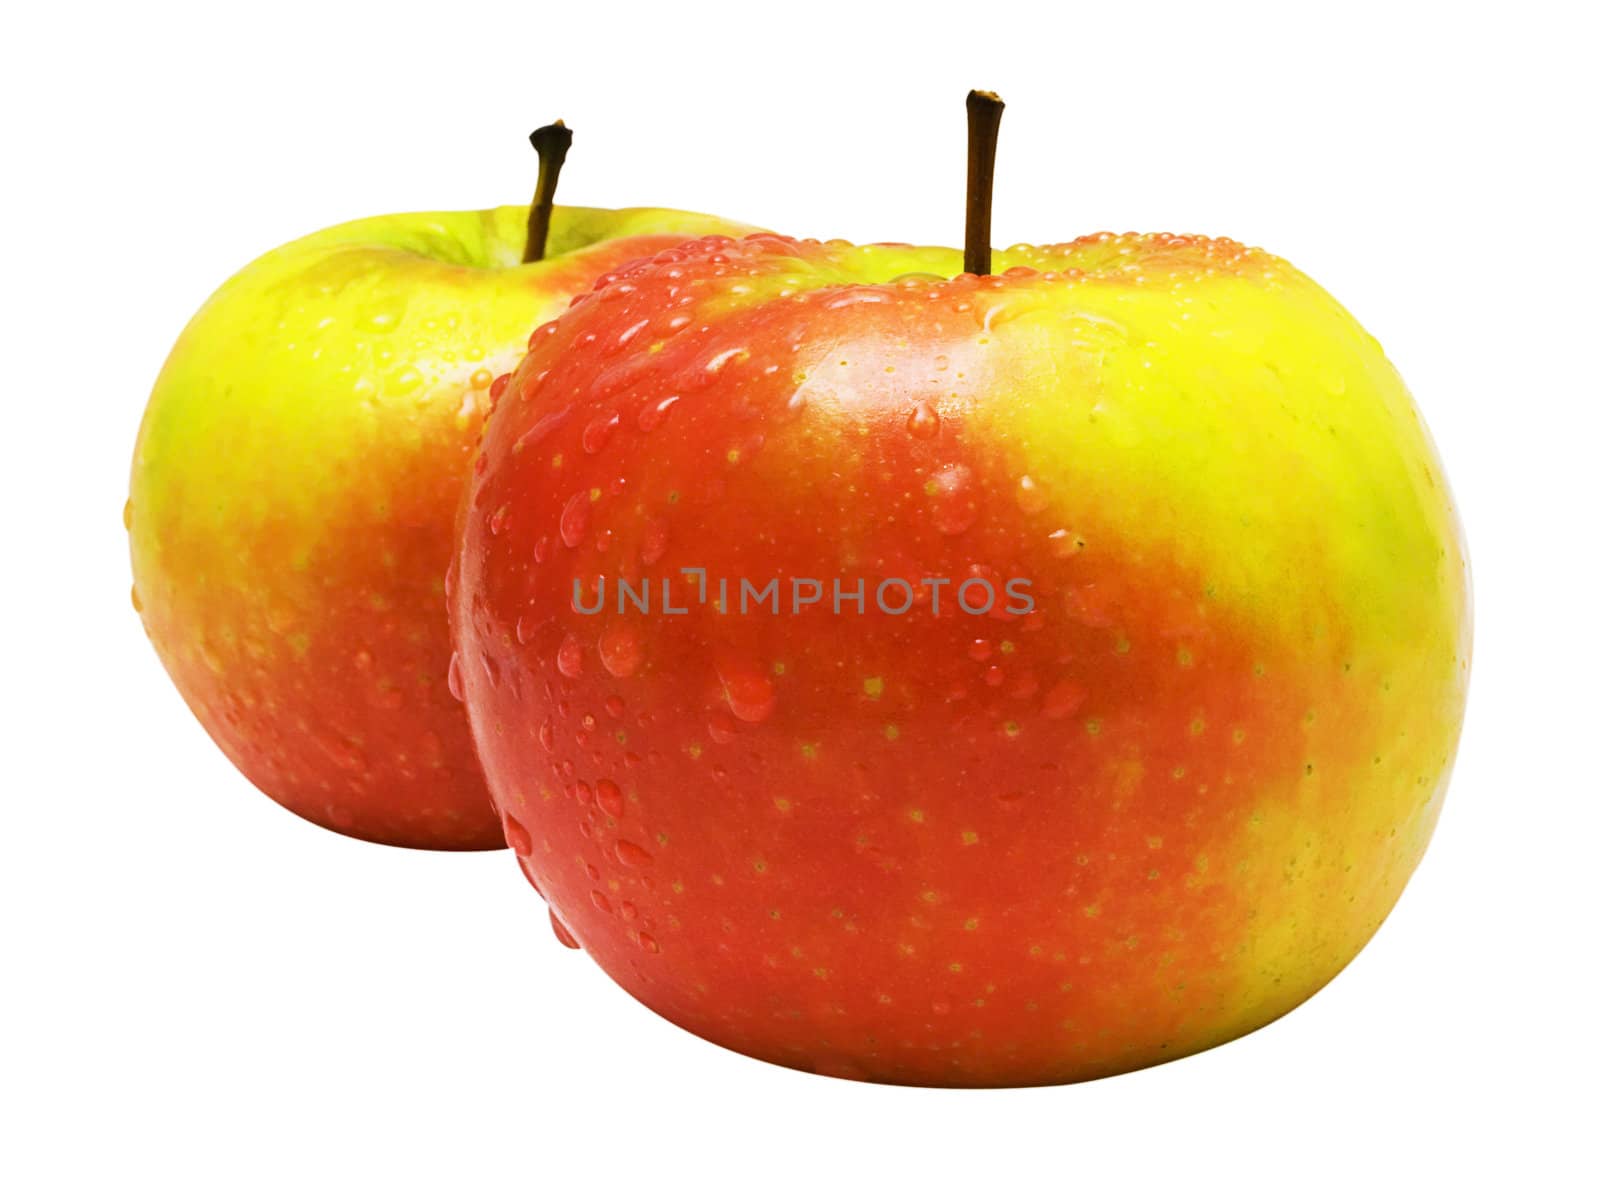 Raindrops on two colorful apples on a white background. Clipping path included.